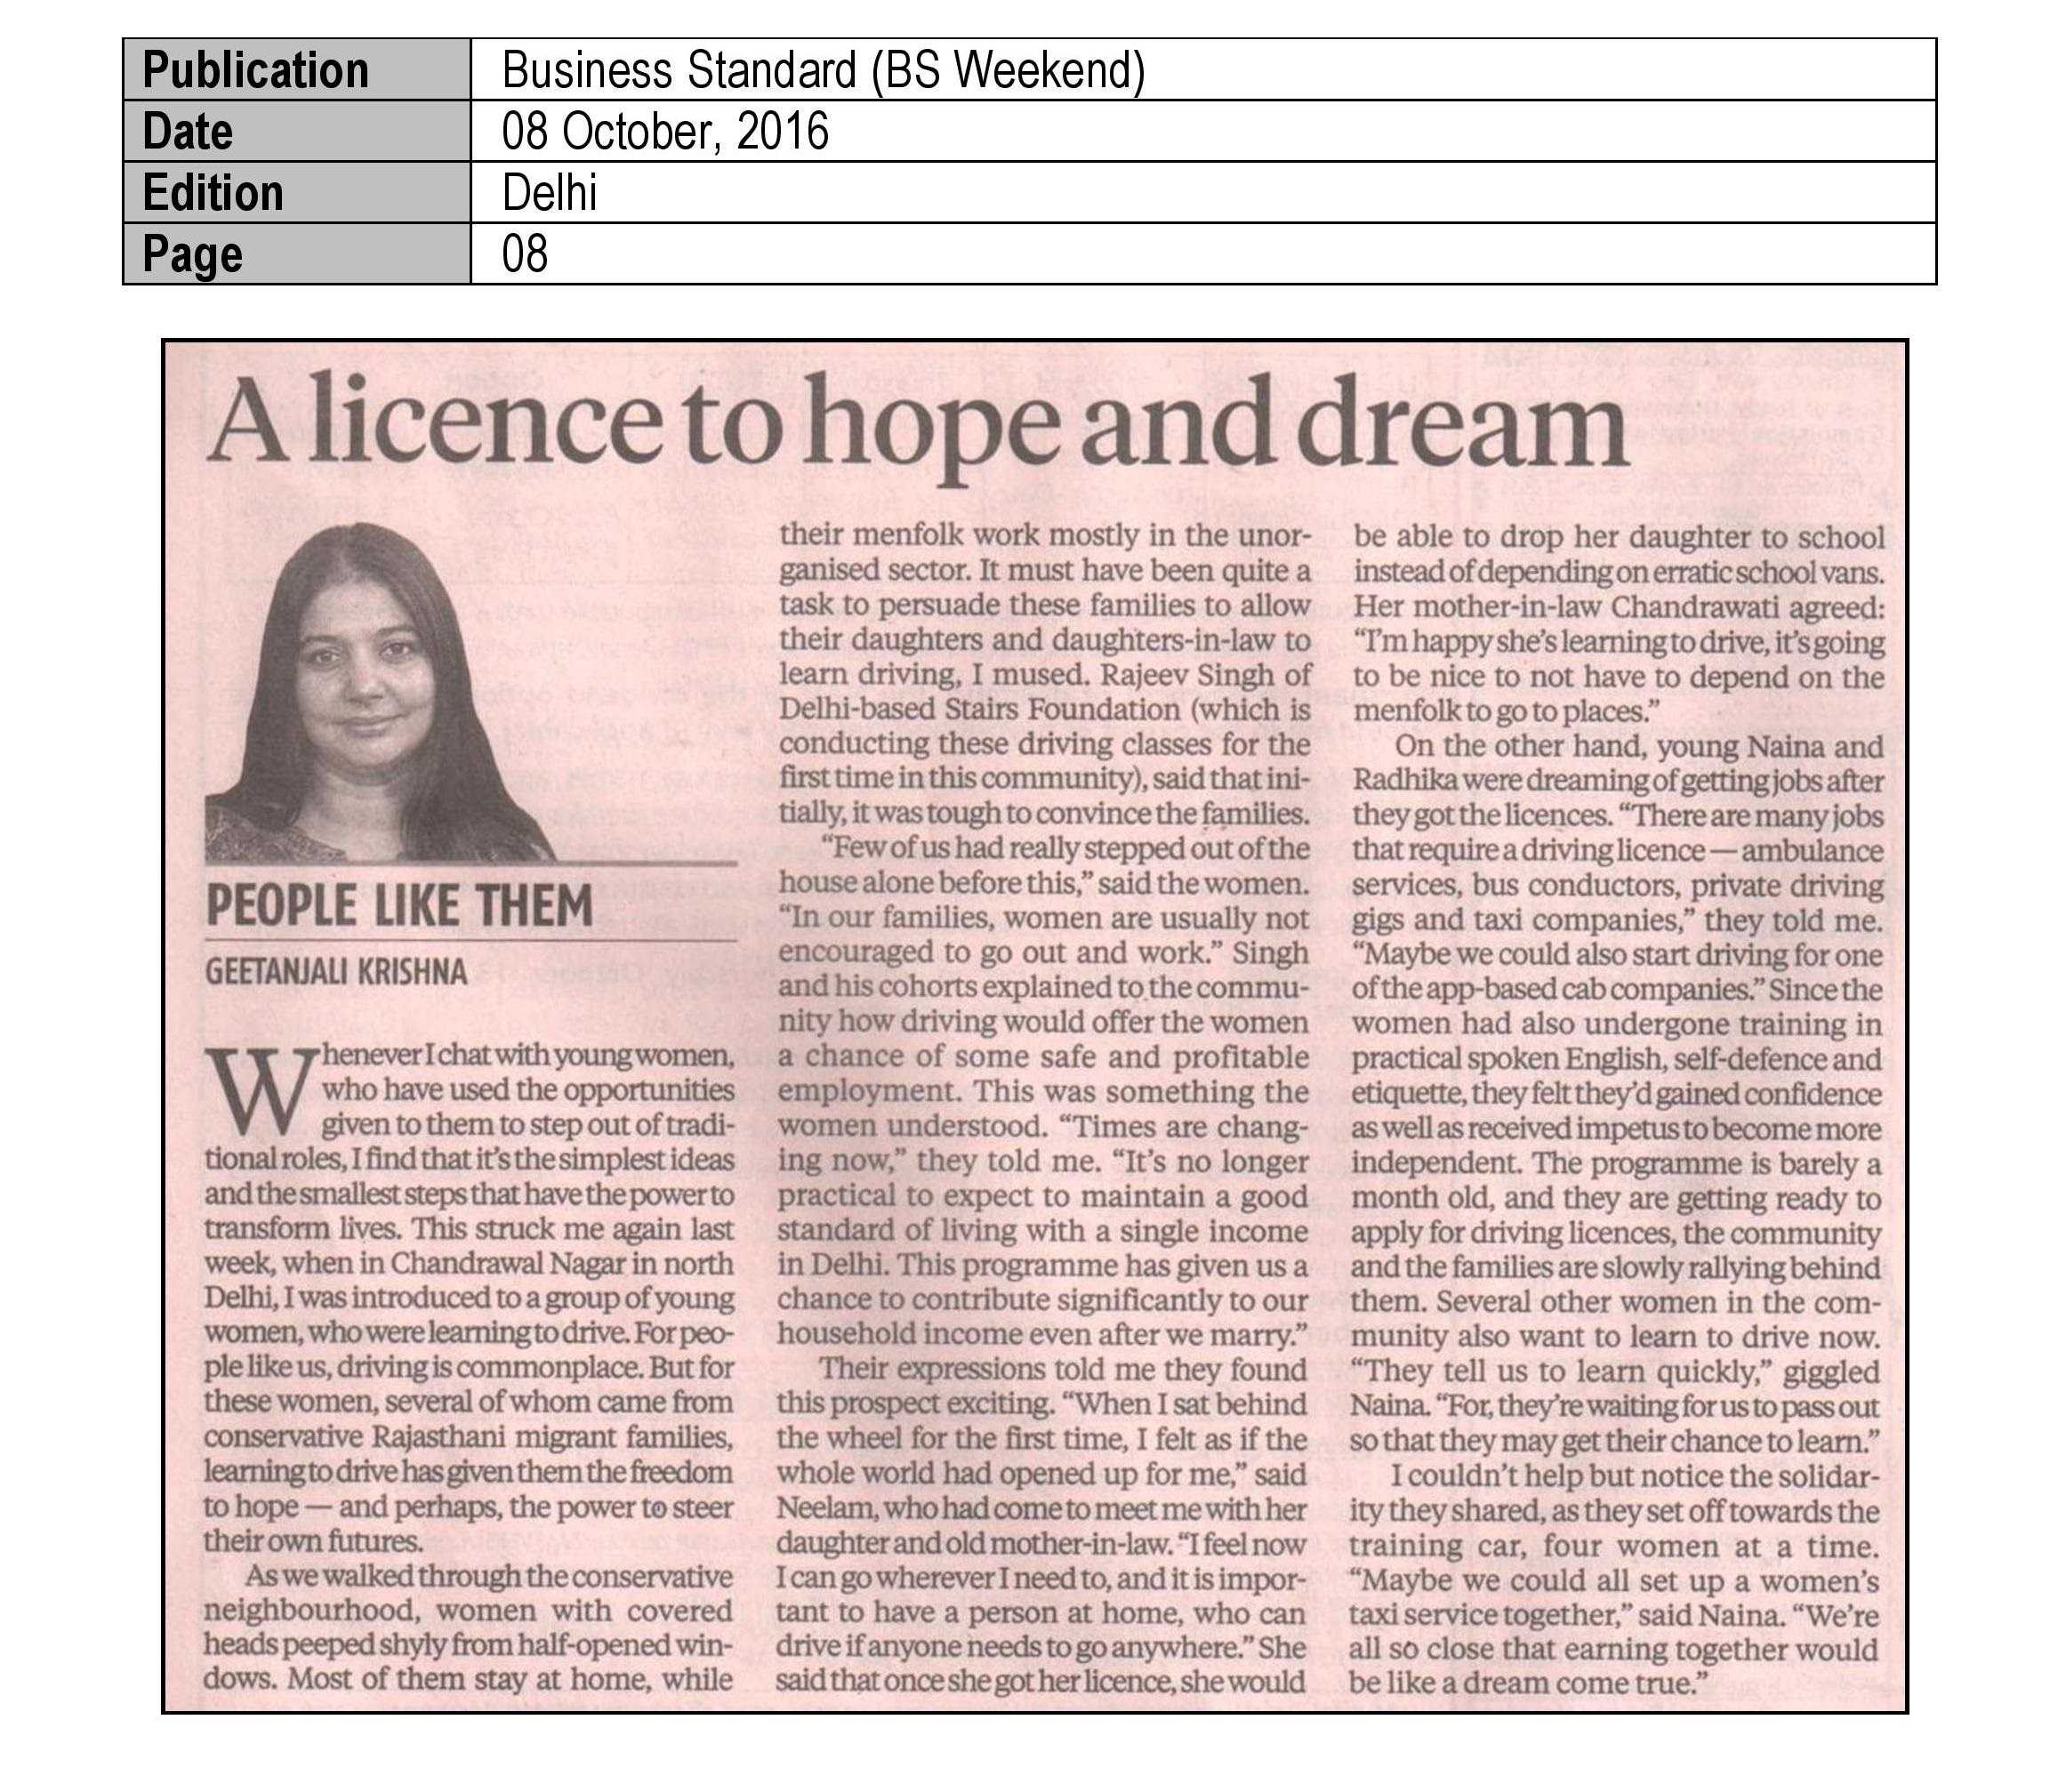 A Licence To Hope And Dream